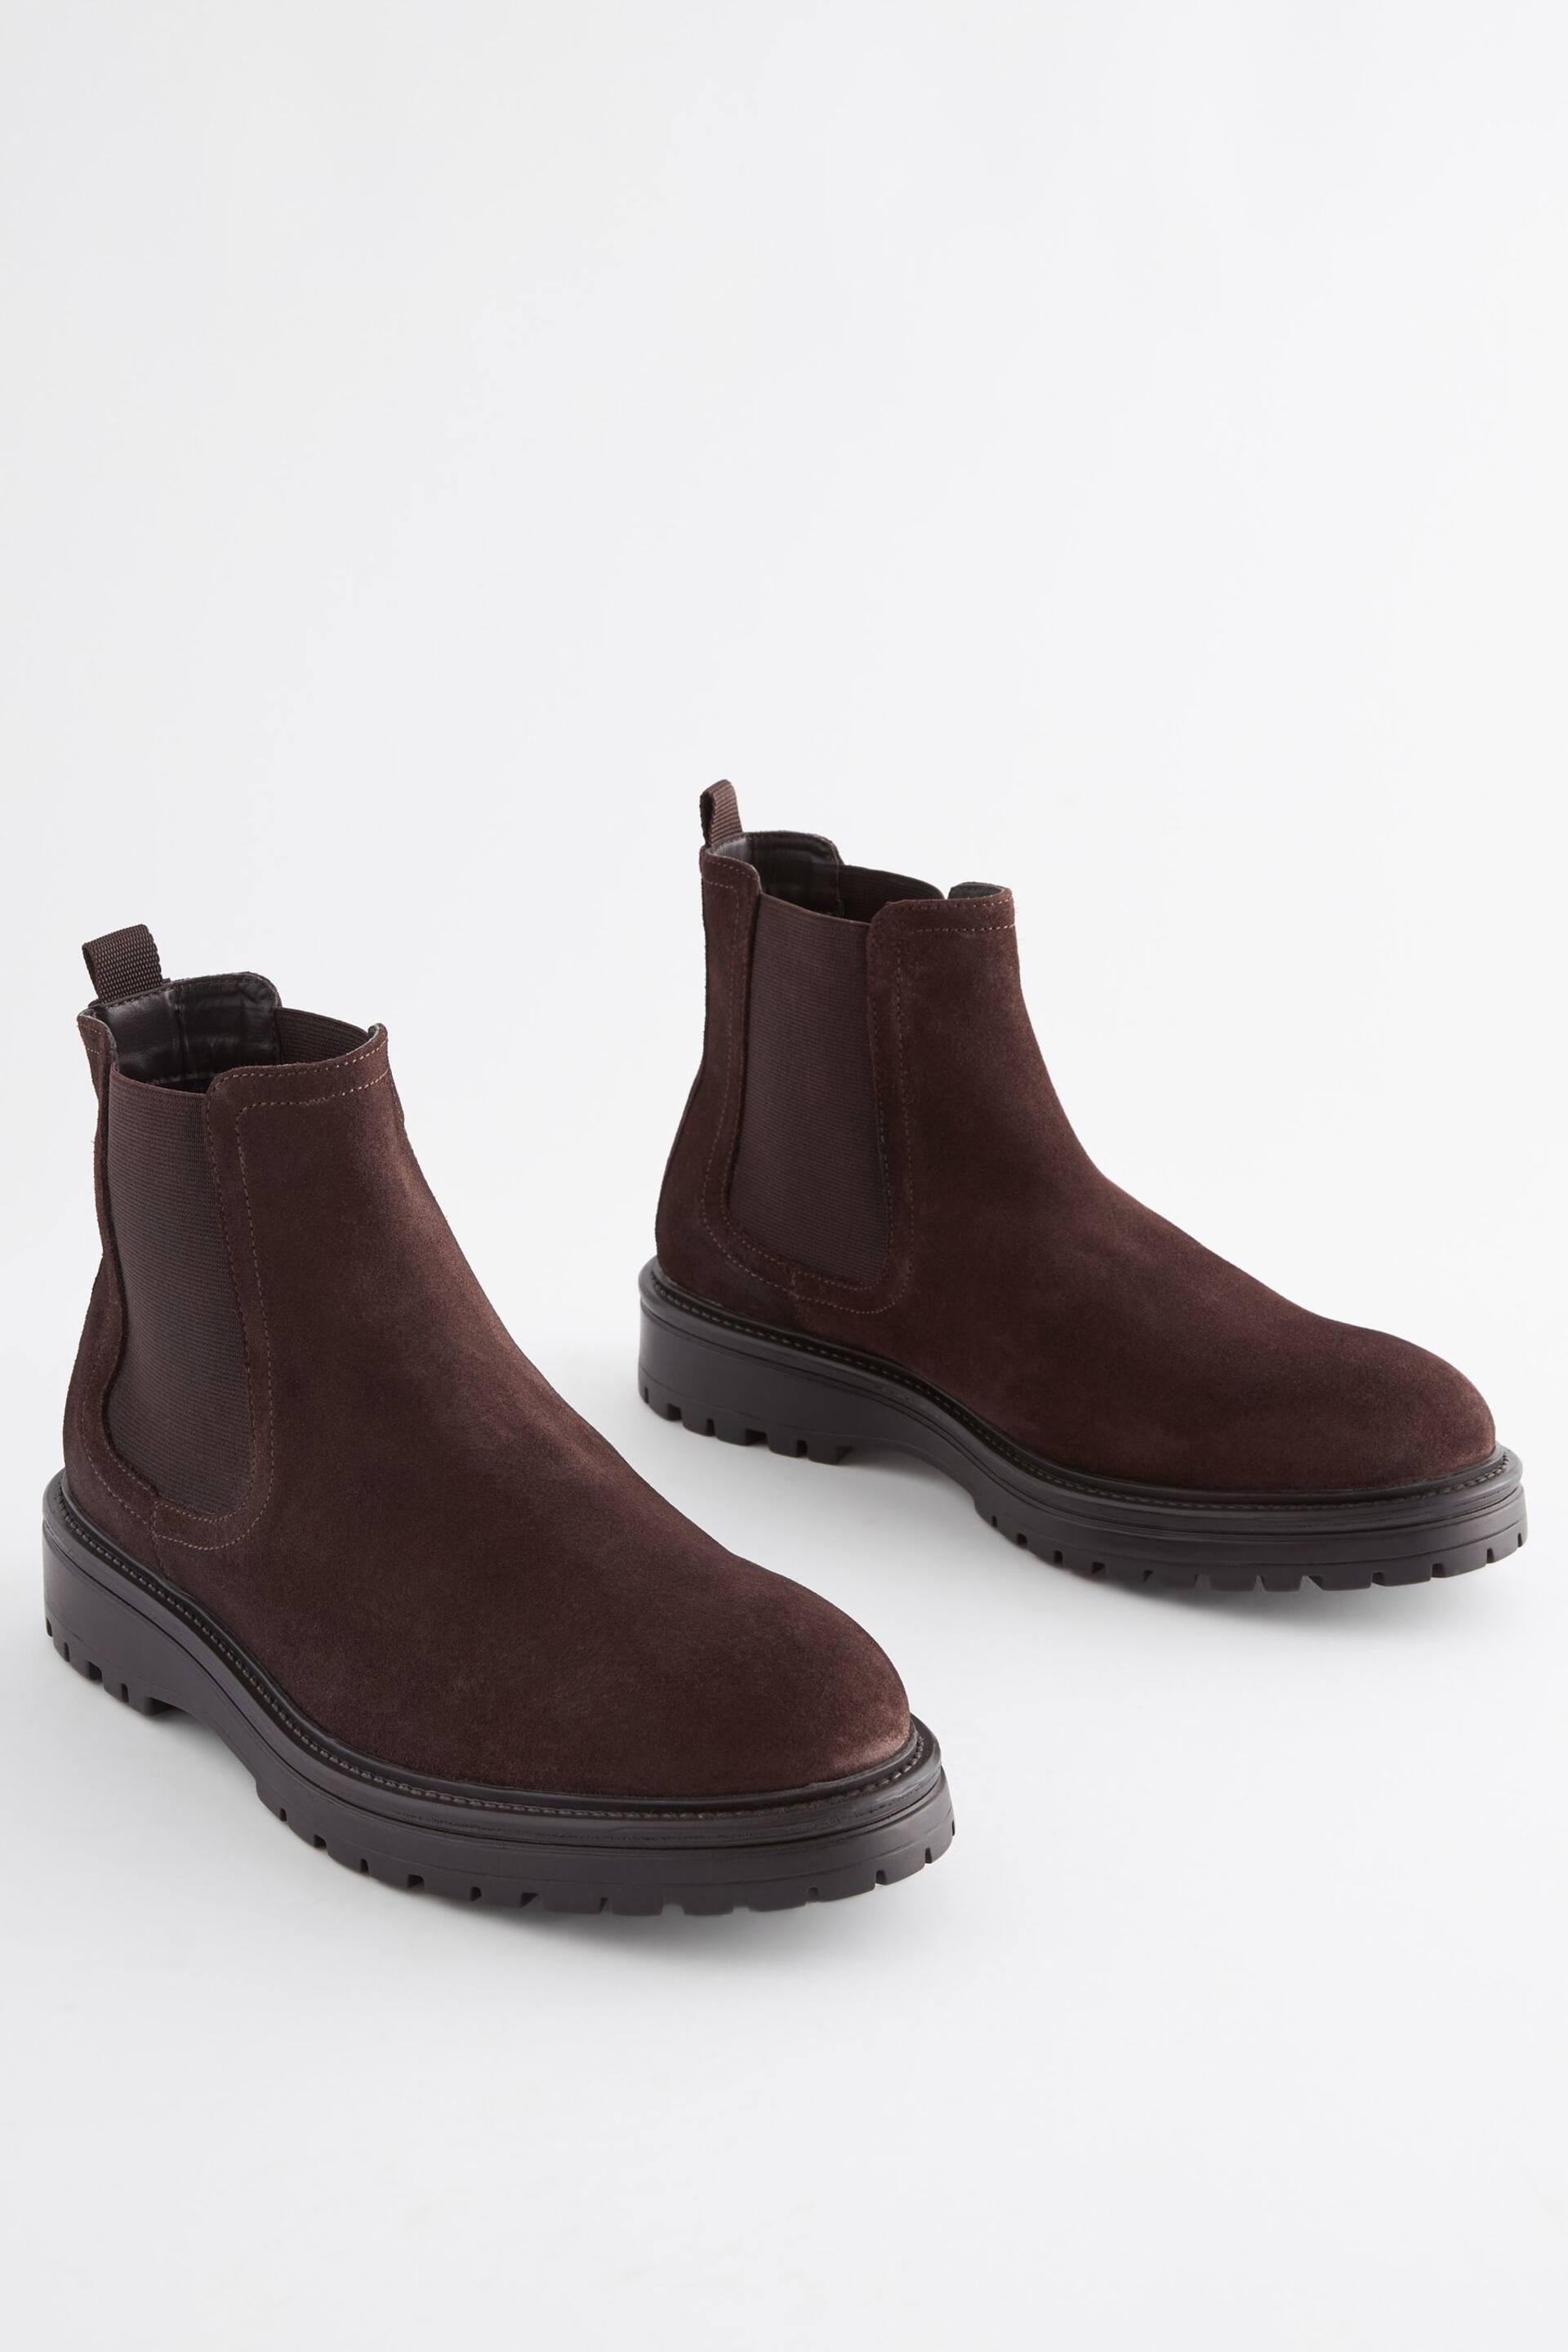 Brown Chunky Leather Chelsea Boots - Image 1 of 5